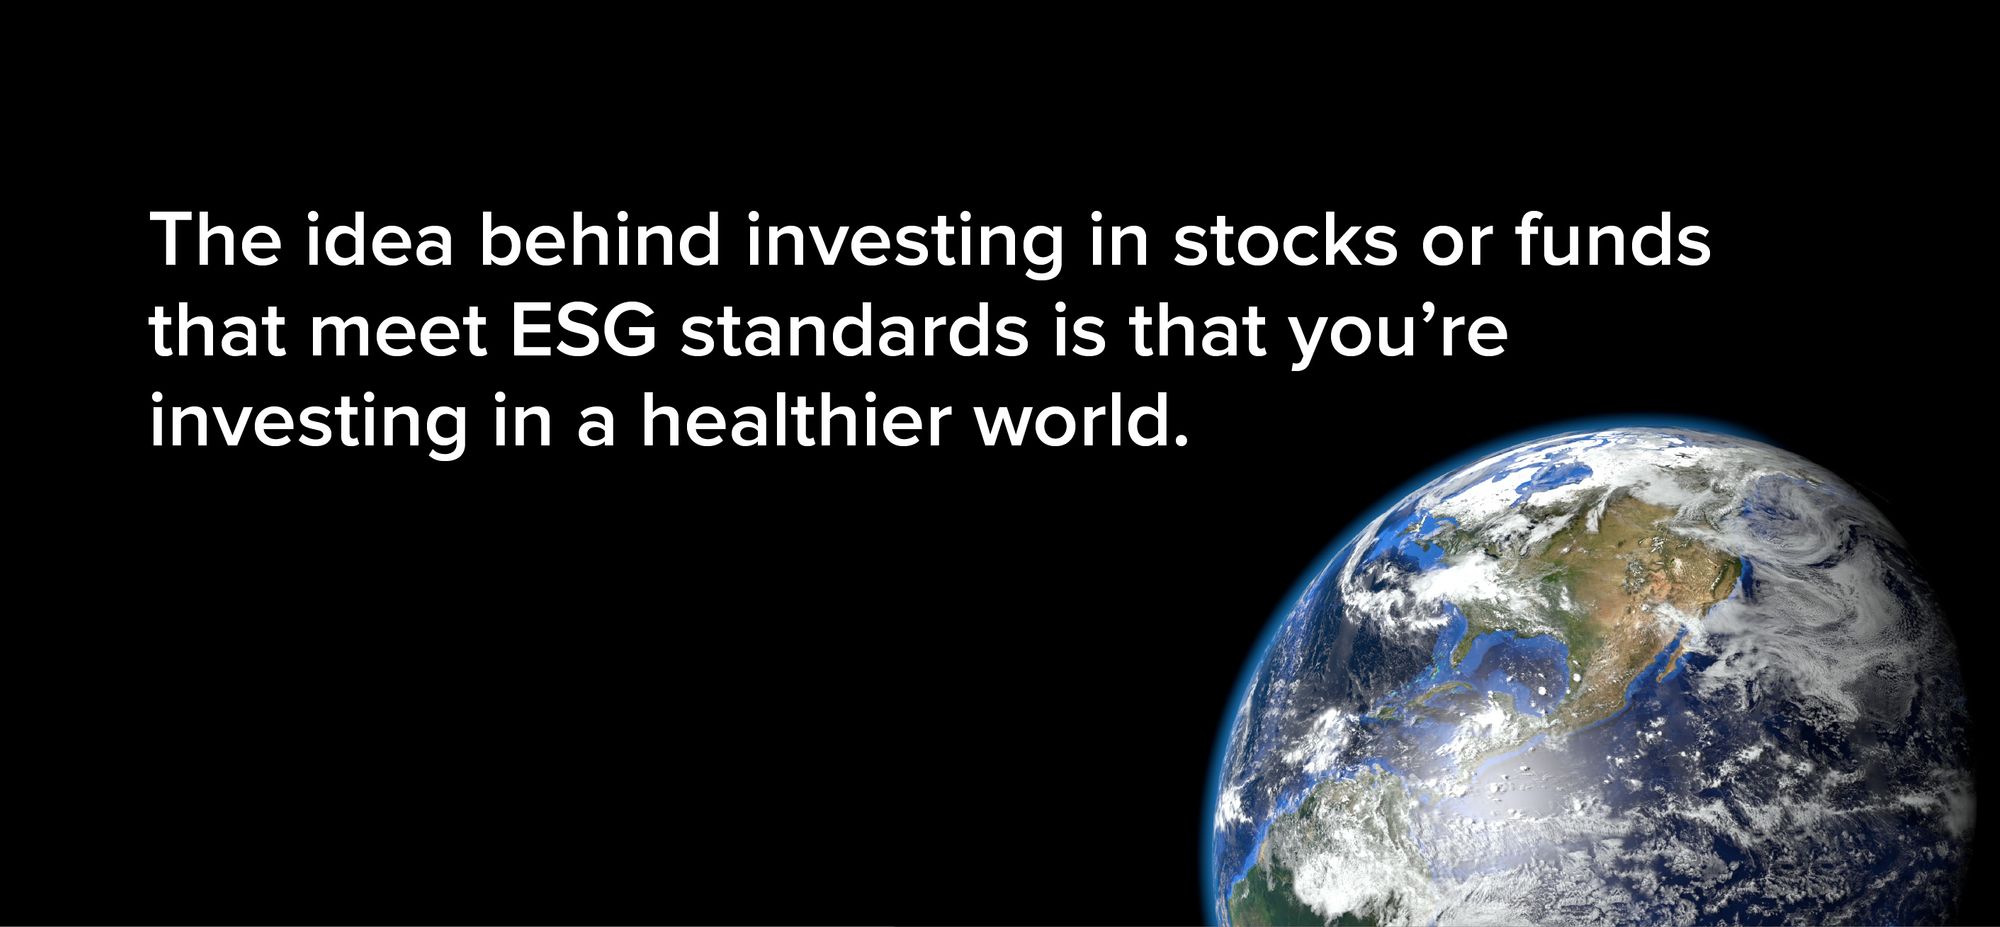 The idea behind investing in stocks or funds that meet ESG standards is that you’re investing in a healthier world.